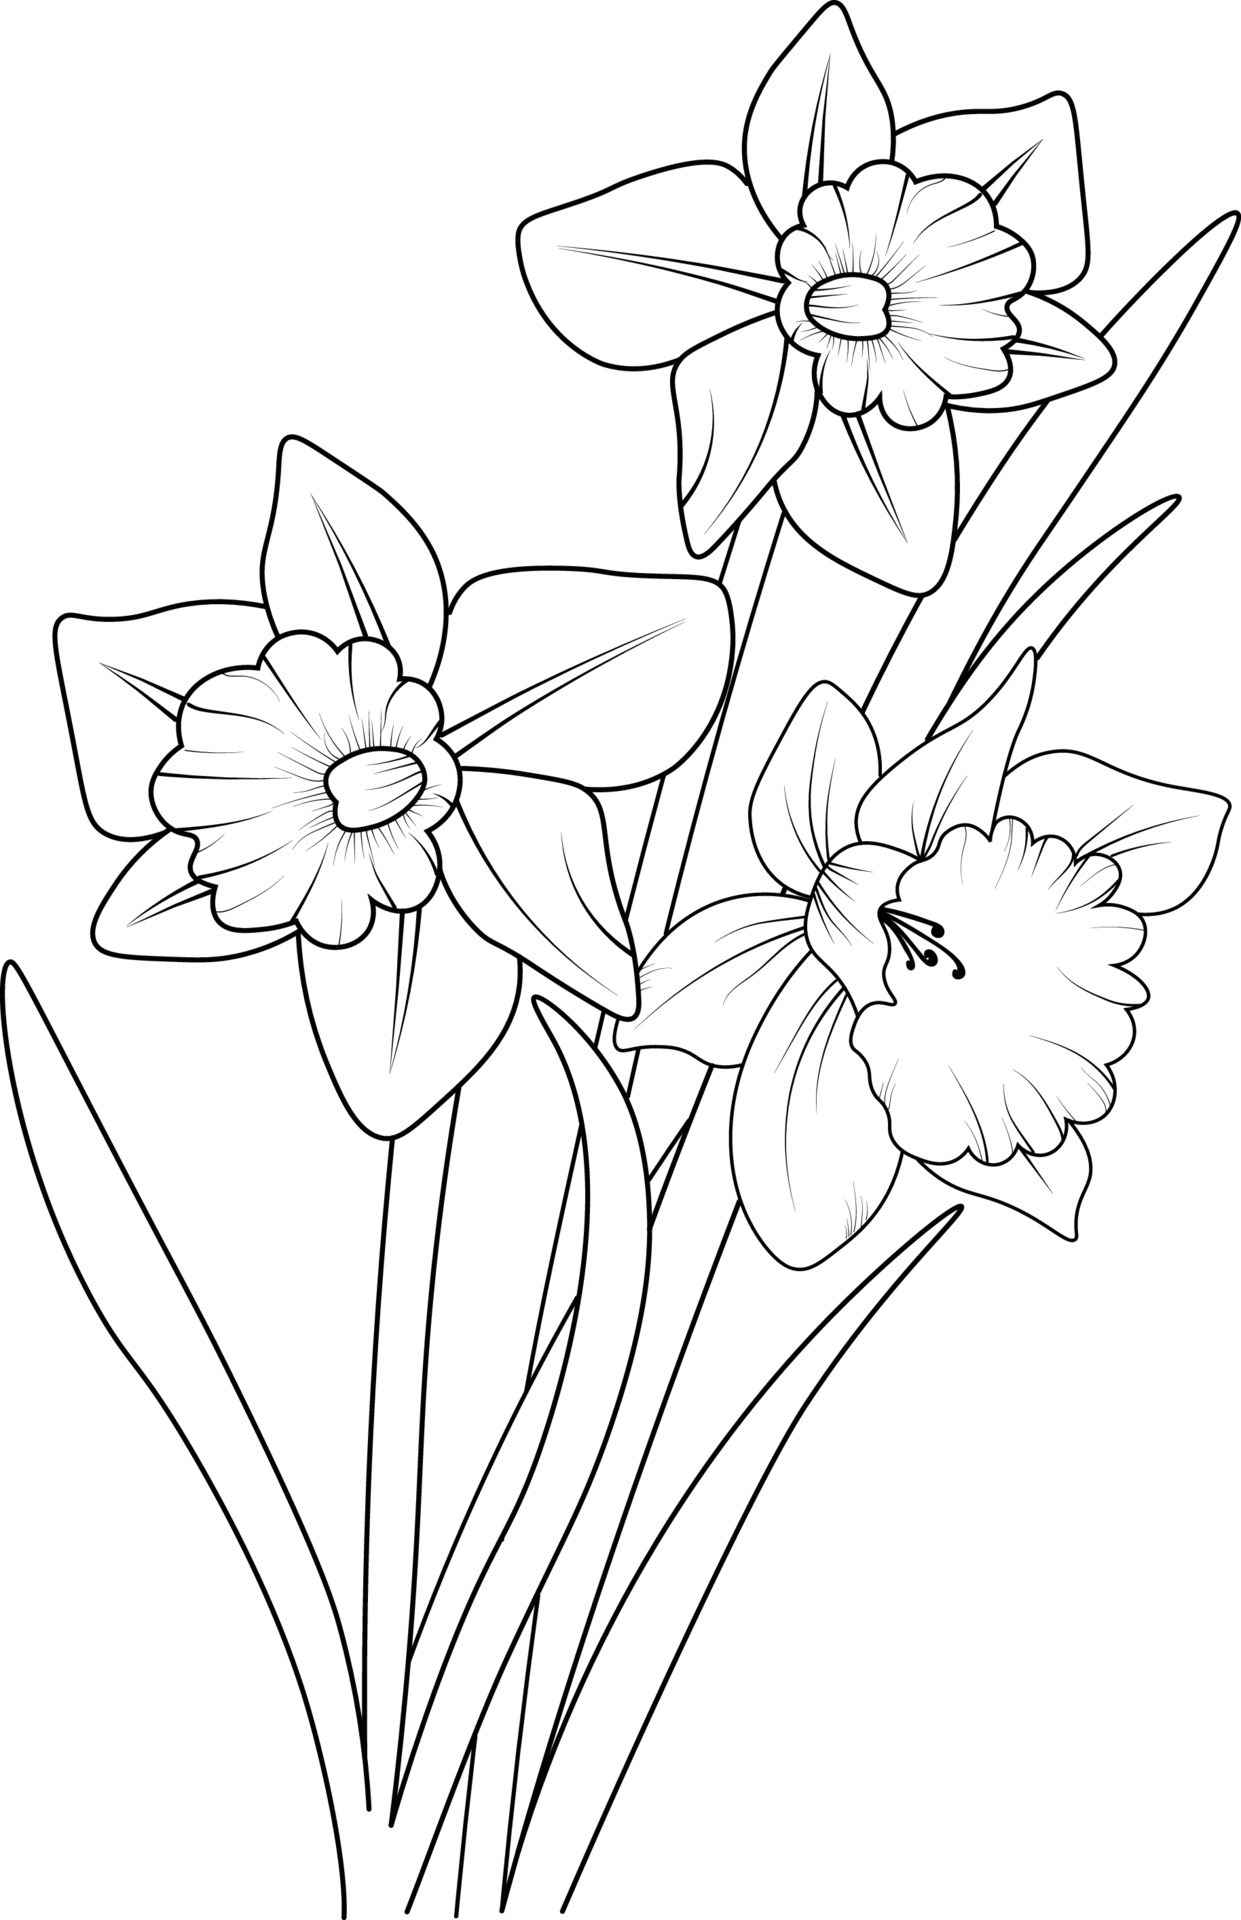 Hand drawn daffodils, narcissus flower bouquet vector sketch ...